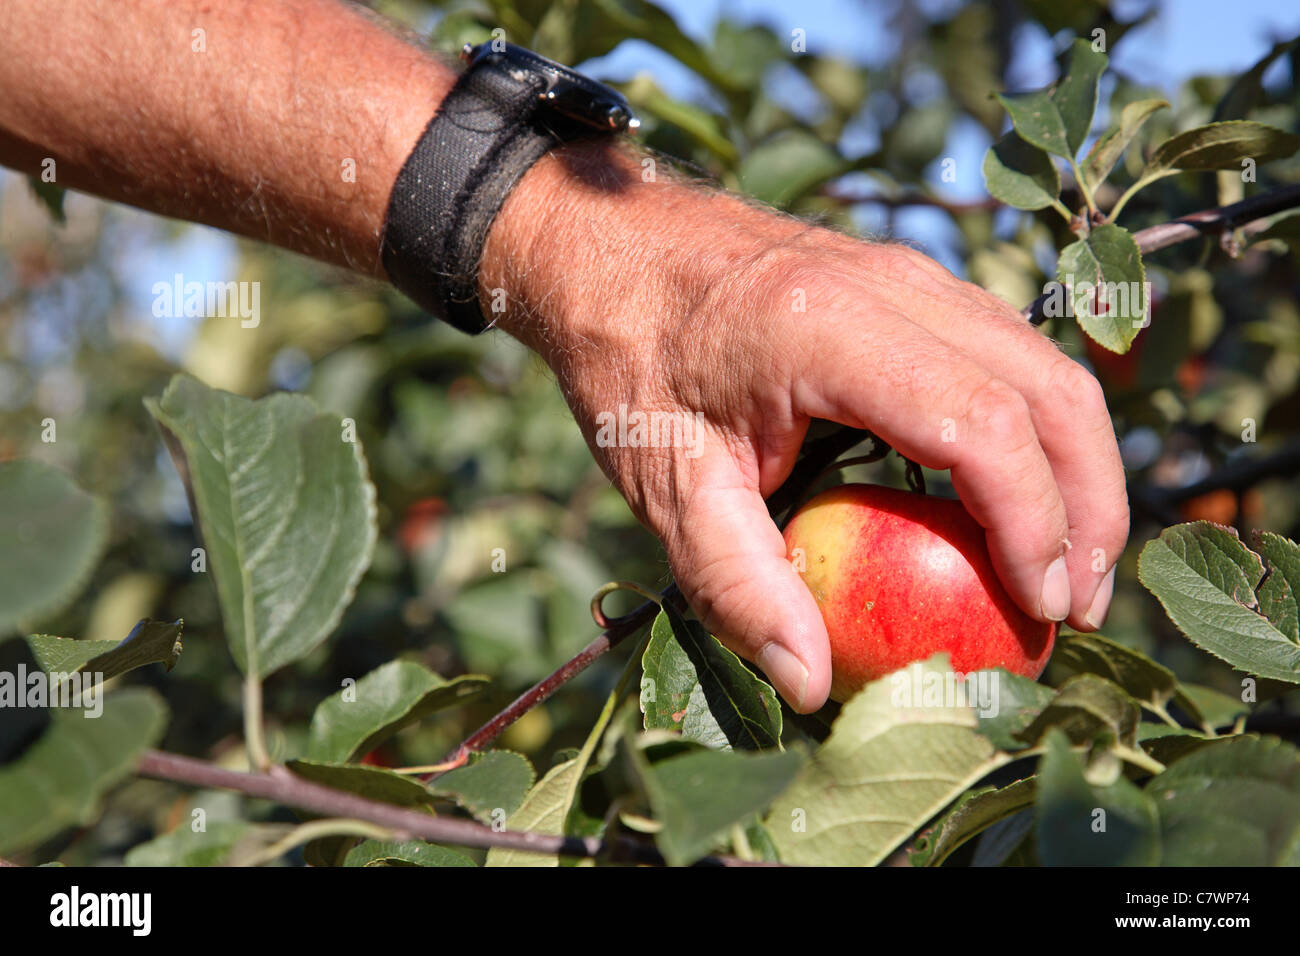 Fruit picker picking a ripe Discovery apple from a branch on an apple tree in an orchard, Denmark Stock Photo